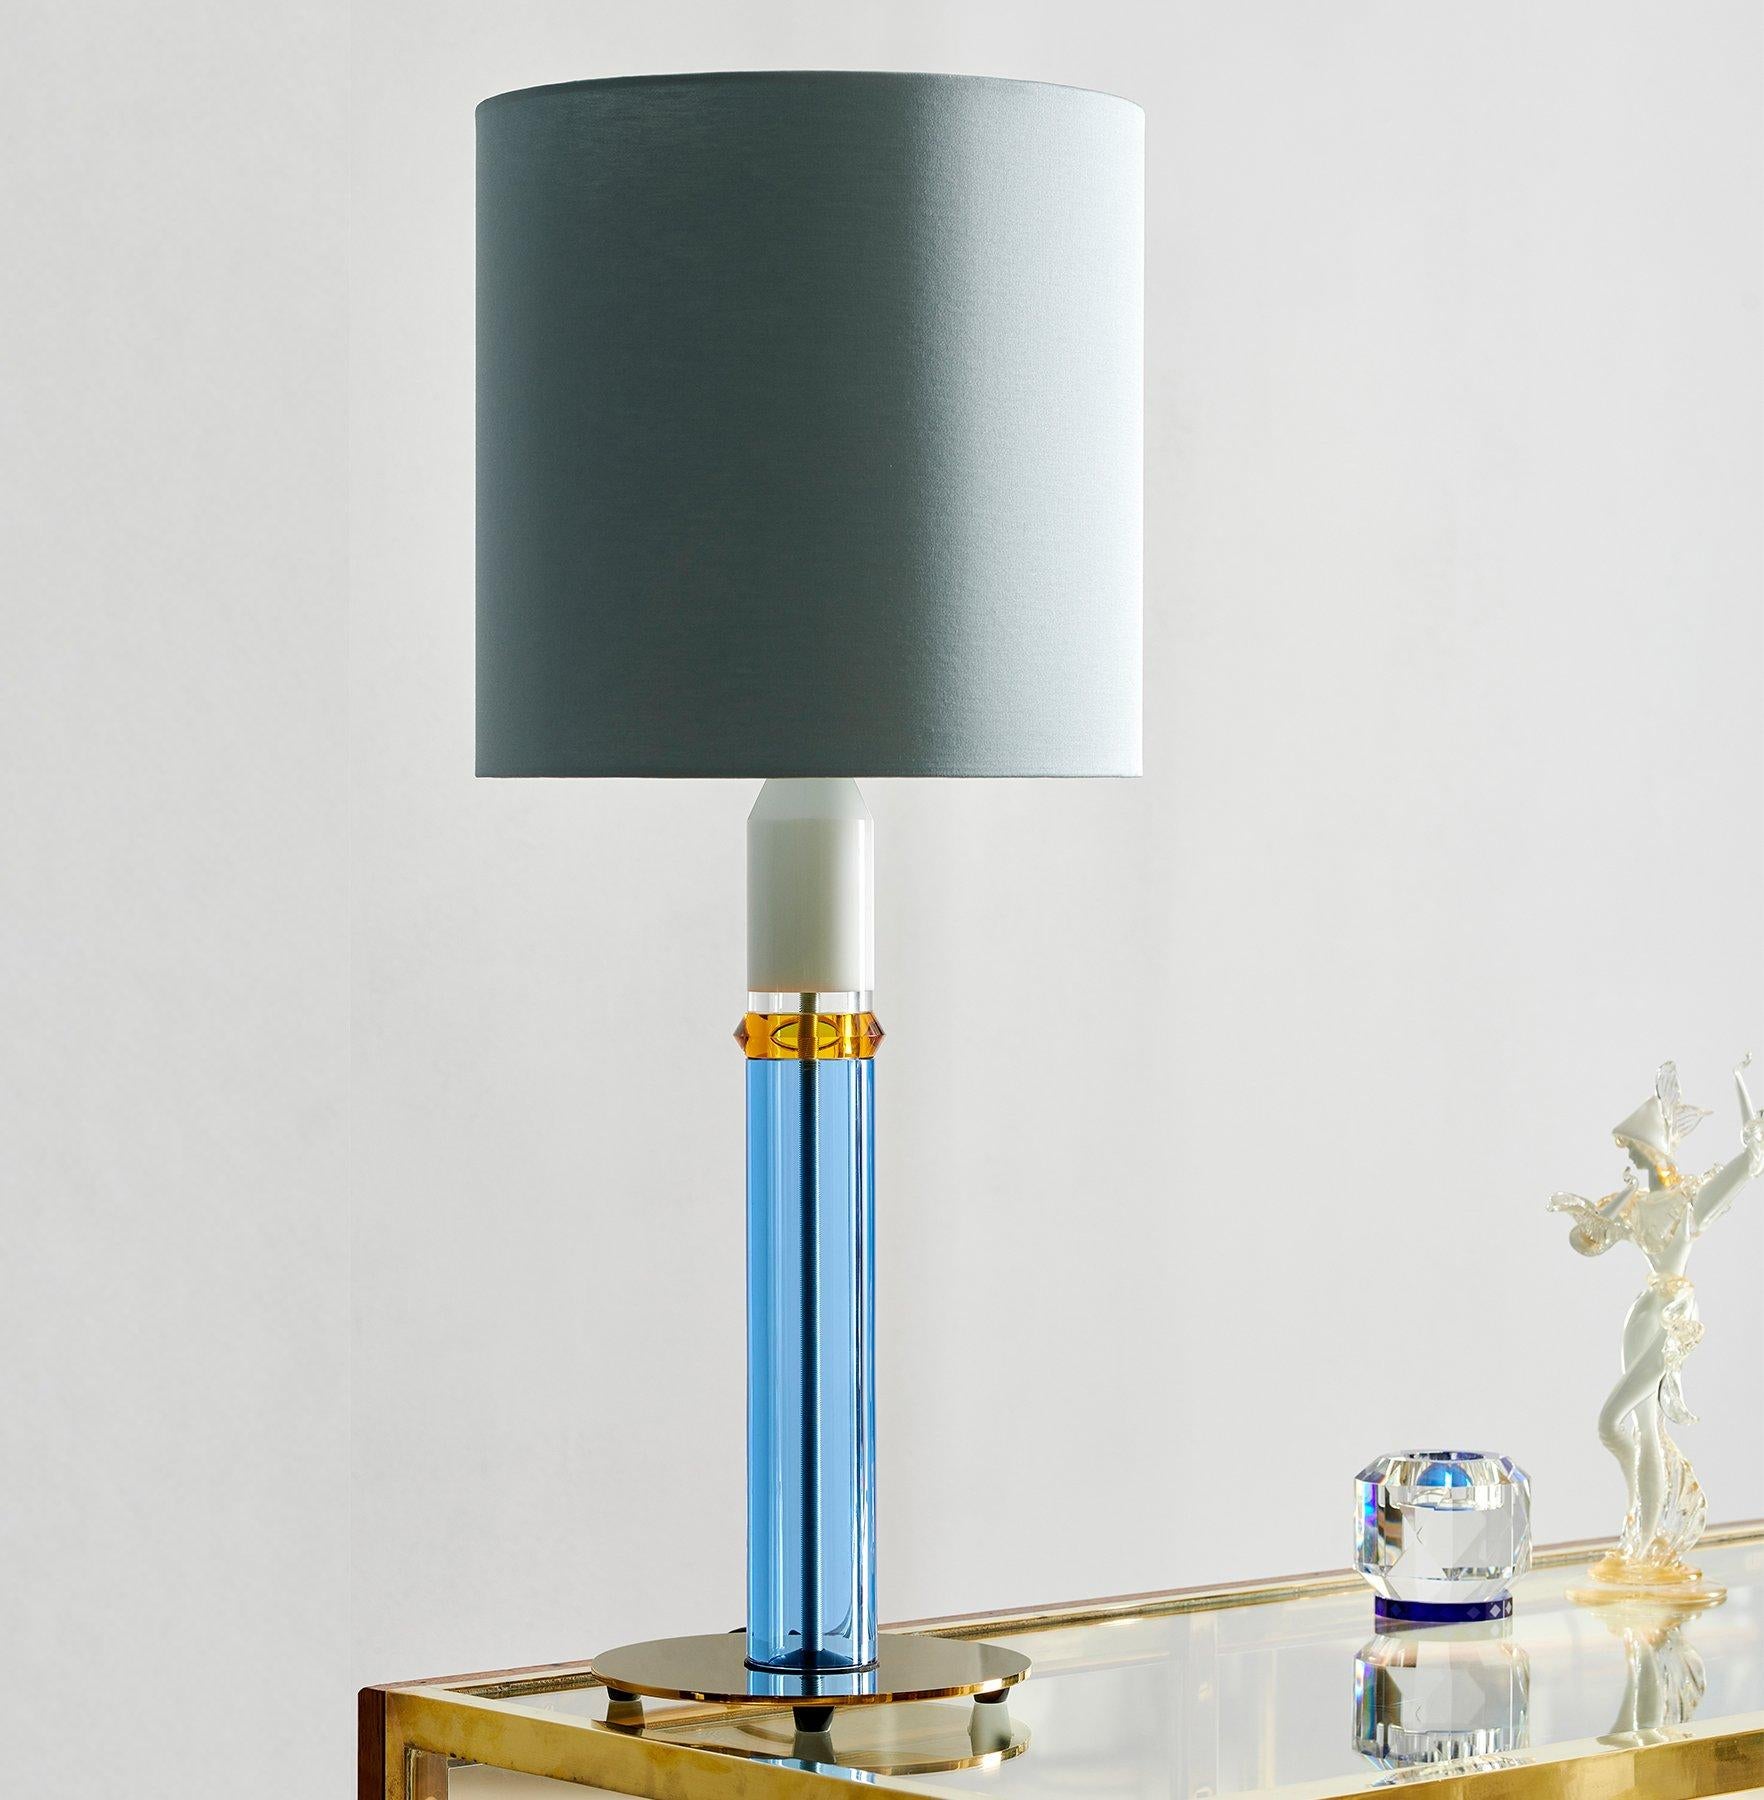 Colorful crystal table lamp, hand-sculpted contemporary crystal
Hand-sculpted in crystal
Measures: Height 72 cm
Width 30 cm
Weight: 3.5 kg
Material: fine handcut crystal and brass coated iron

With blasting colour combinations, a brave